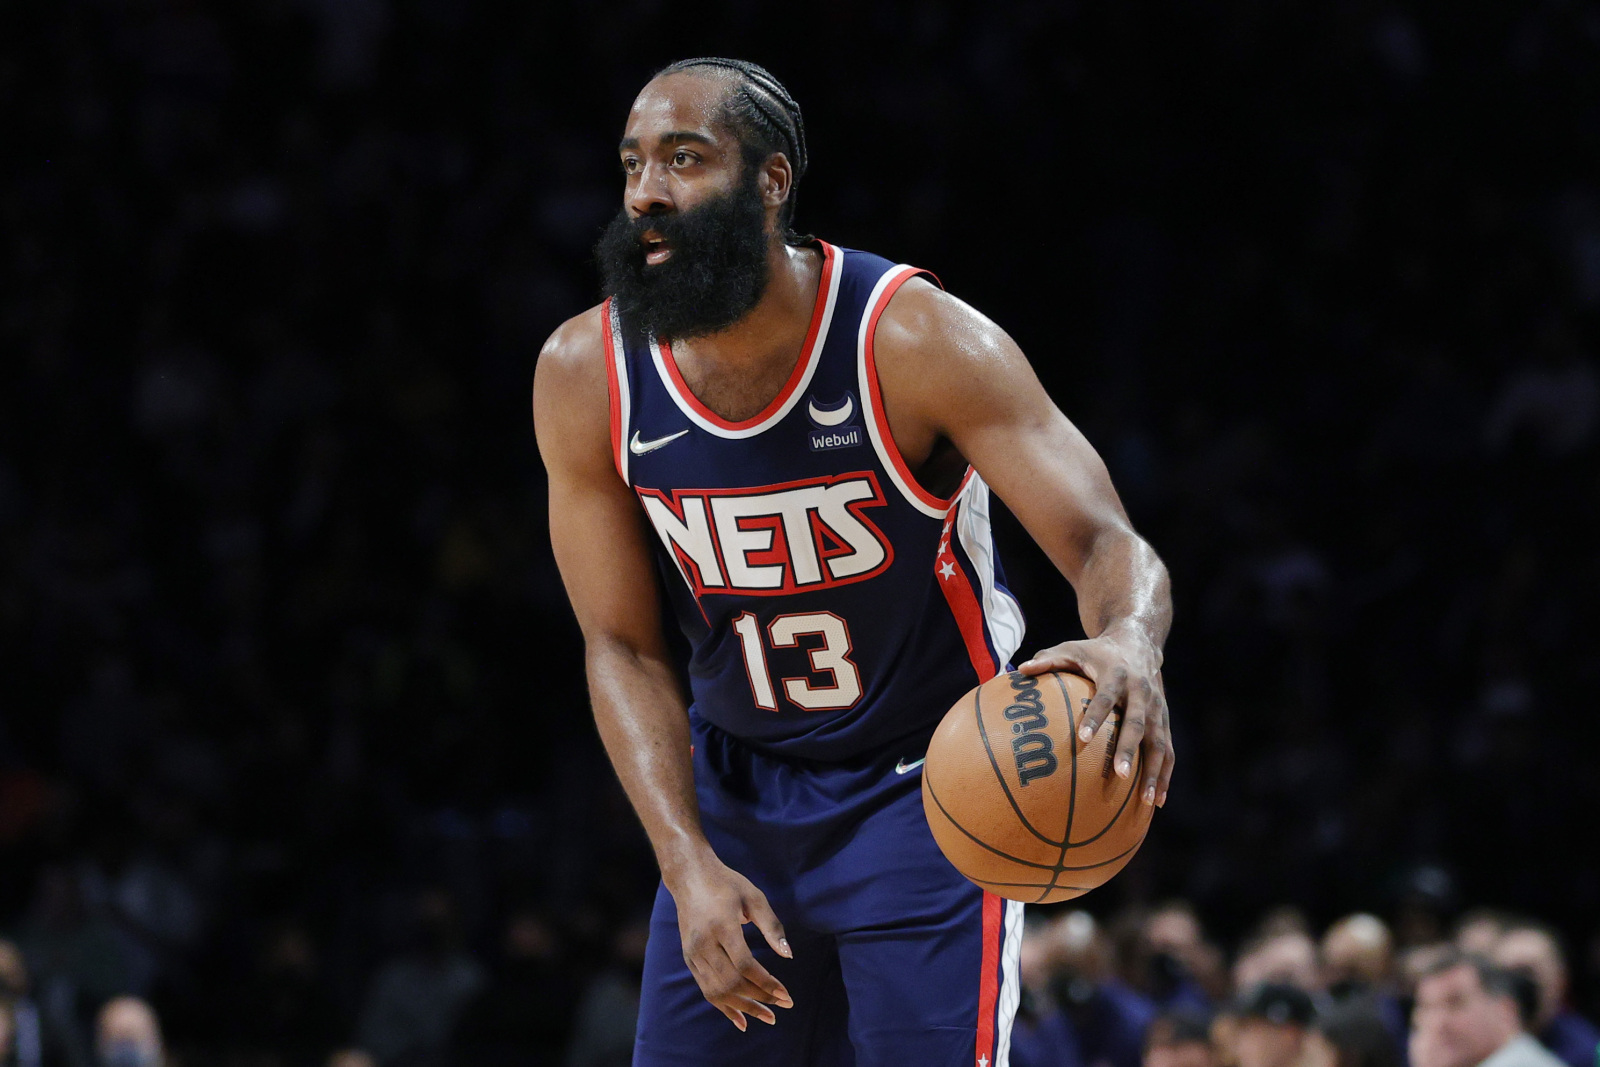 You're Gonna See a Lot of Swag”: James Harden on the New Houston